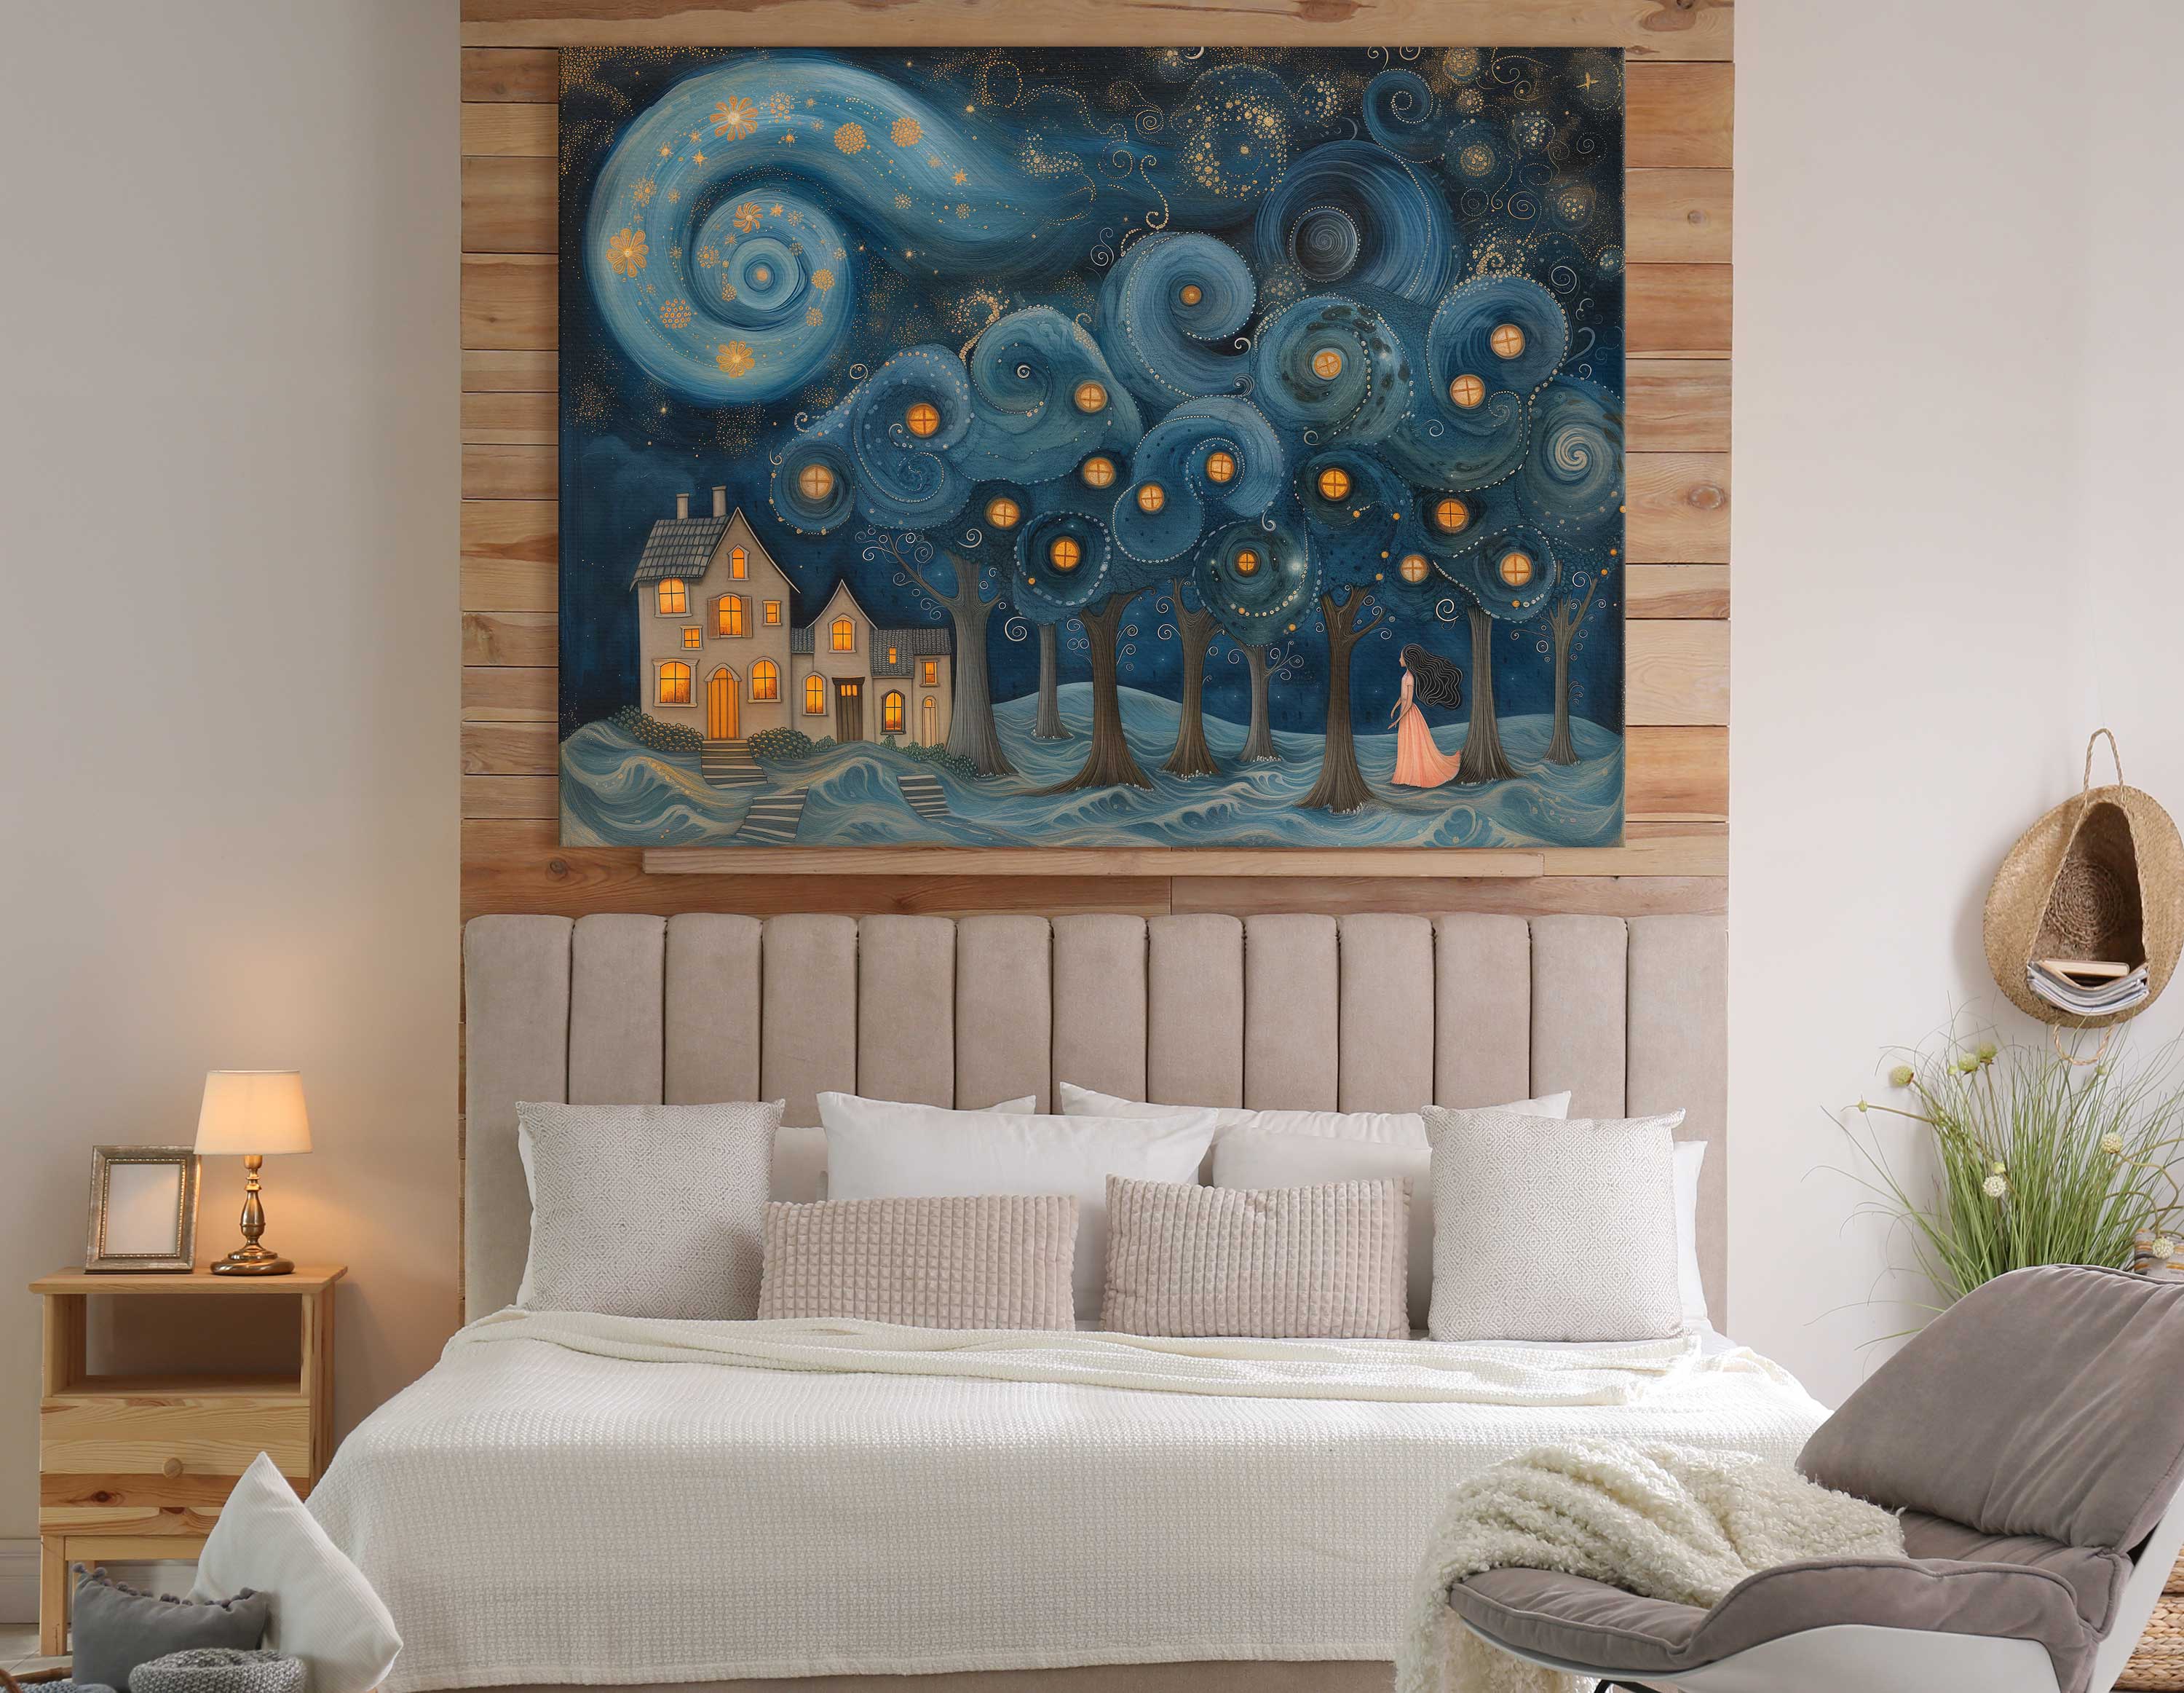 Magical Swirling Skies Over House Wall Art